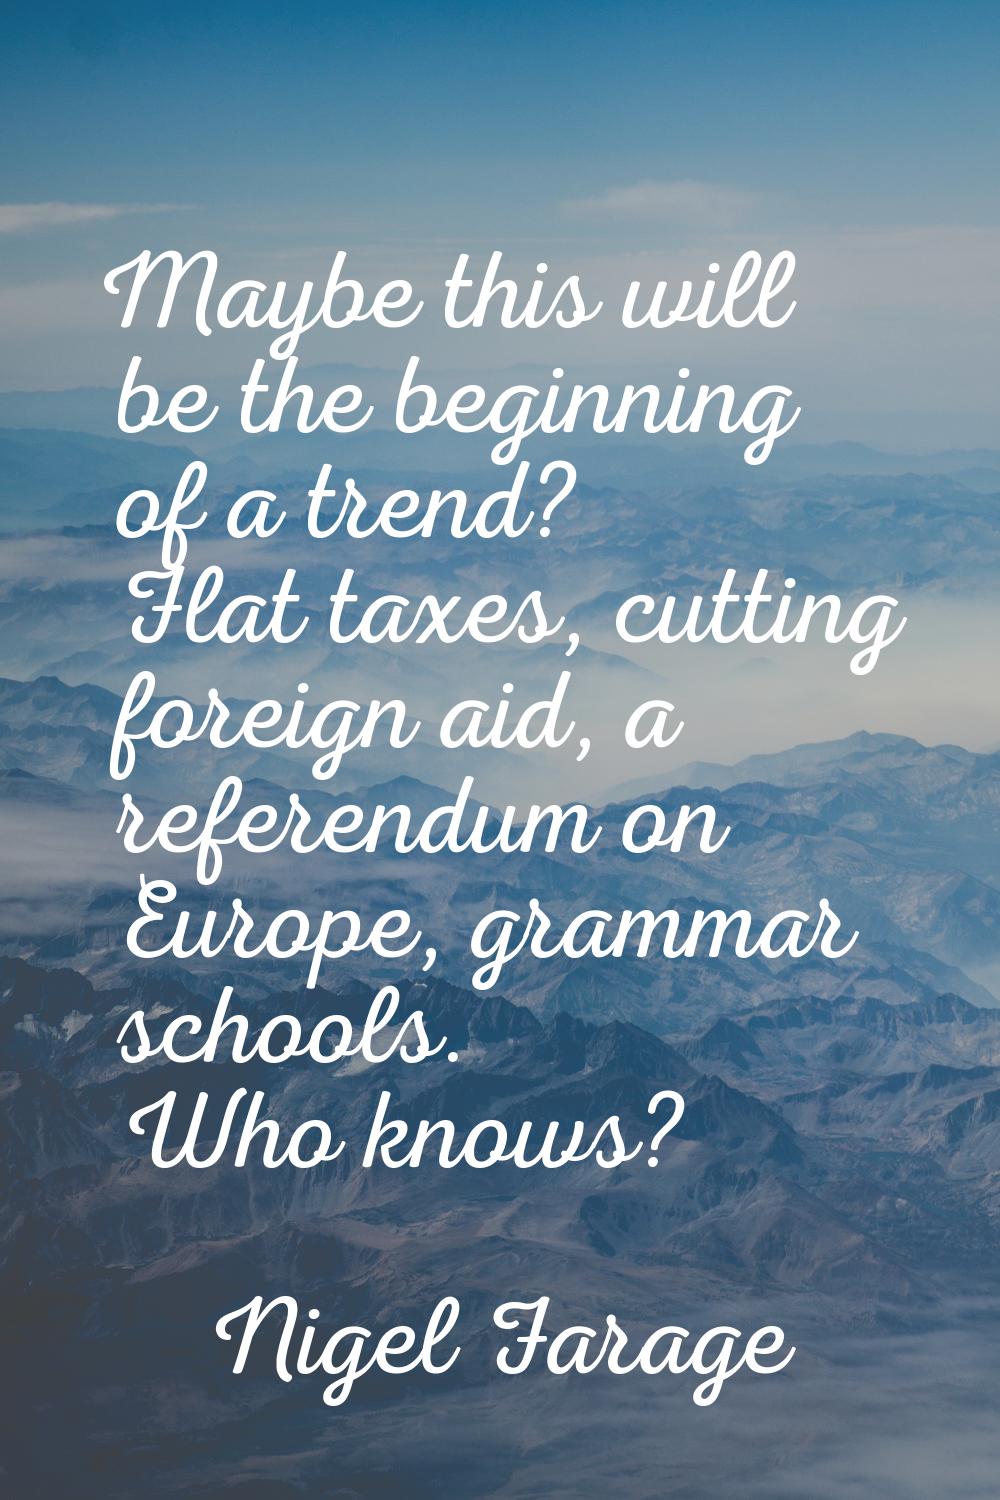 Maybe this will be the beginning of a trend? Flat taxes, cutting foreign aid, a referendum on Europ